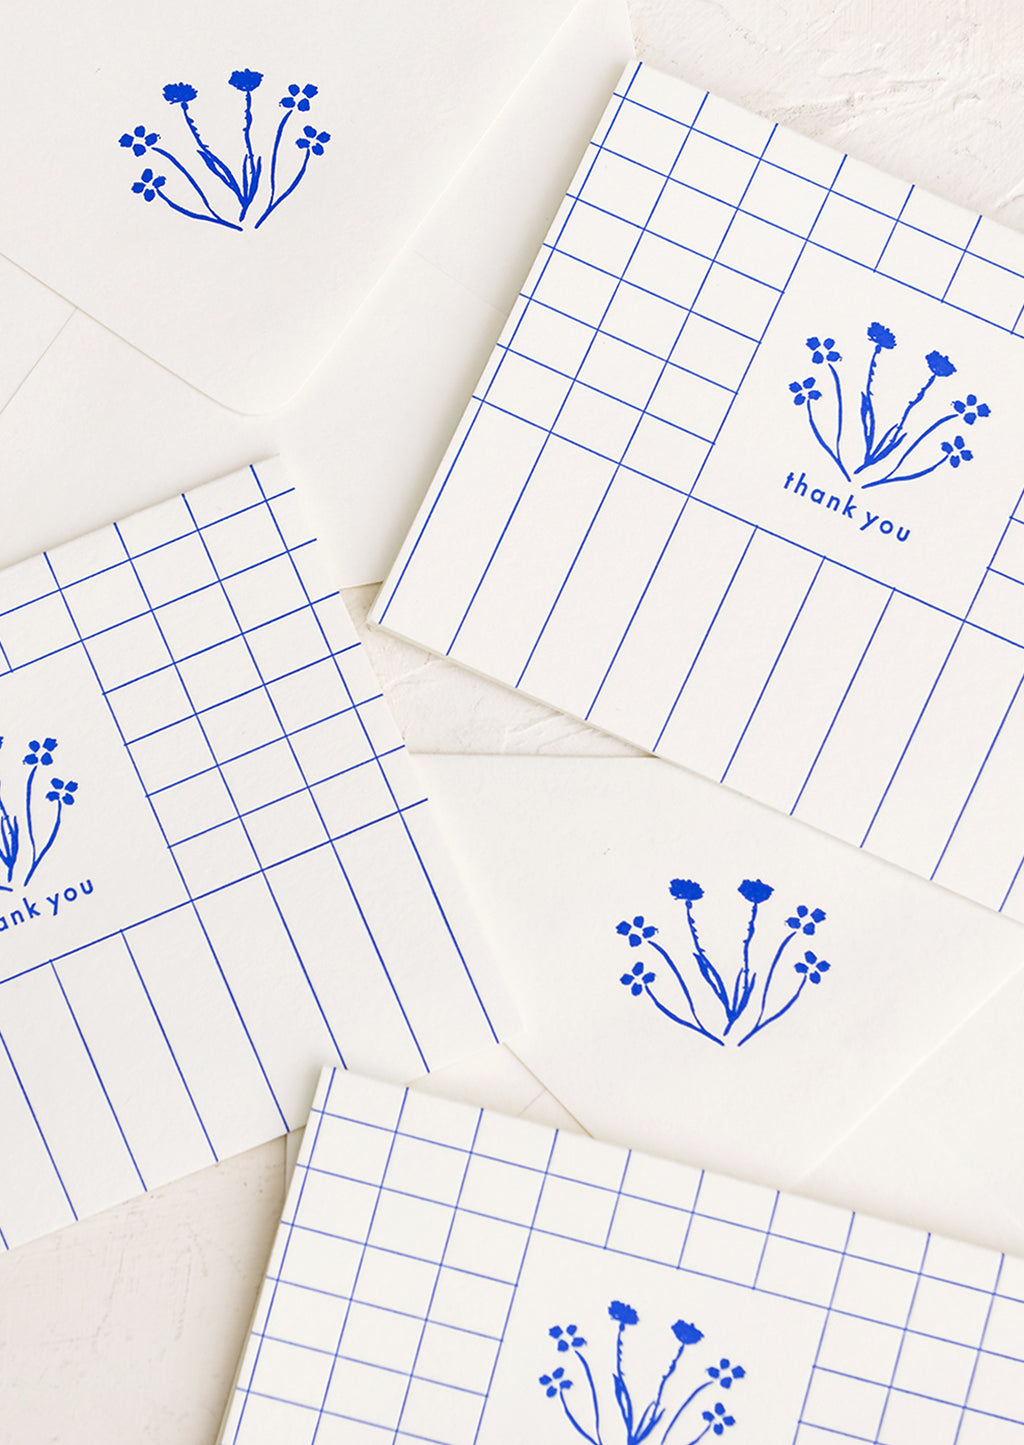 Boxed Set of 6: A set of blue and white grid patterned thank you cards with drawn floral imagery.